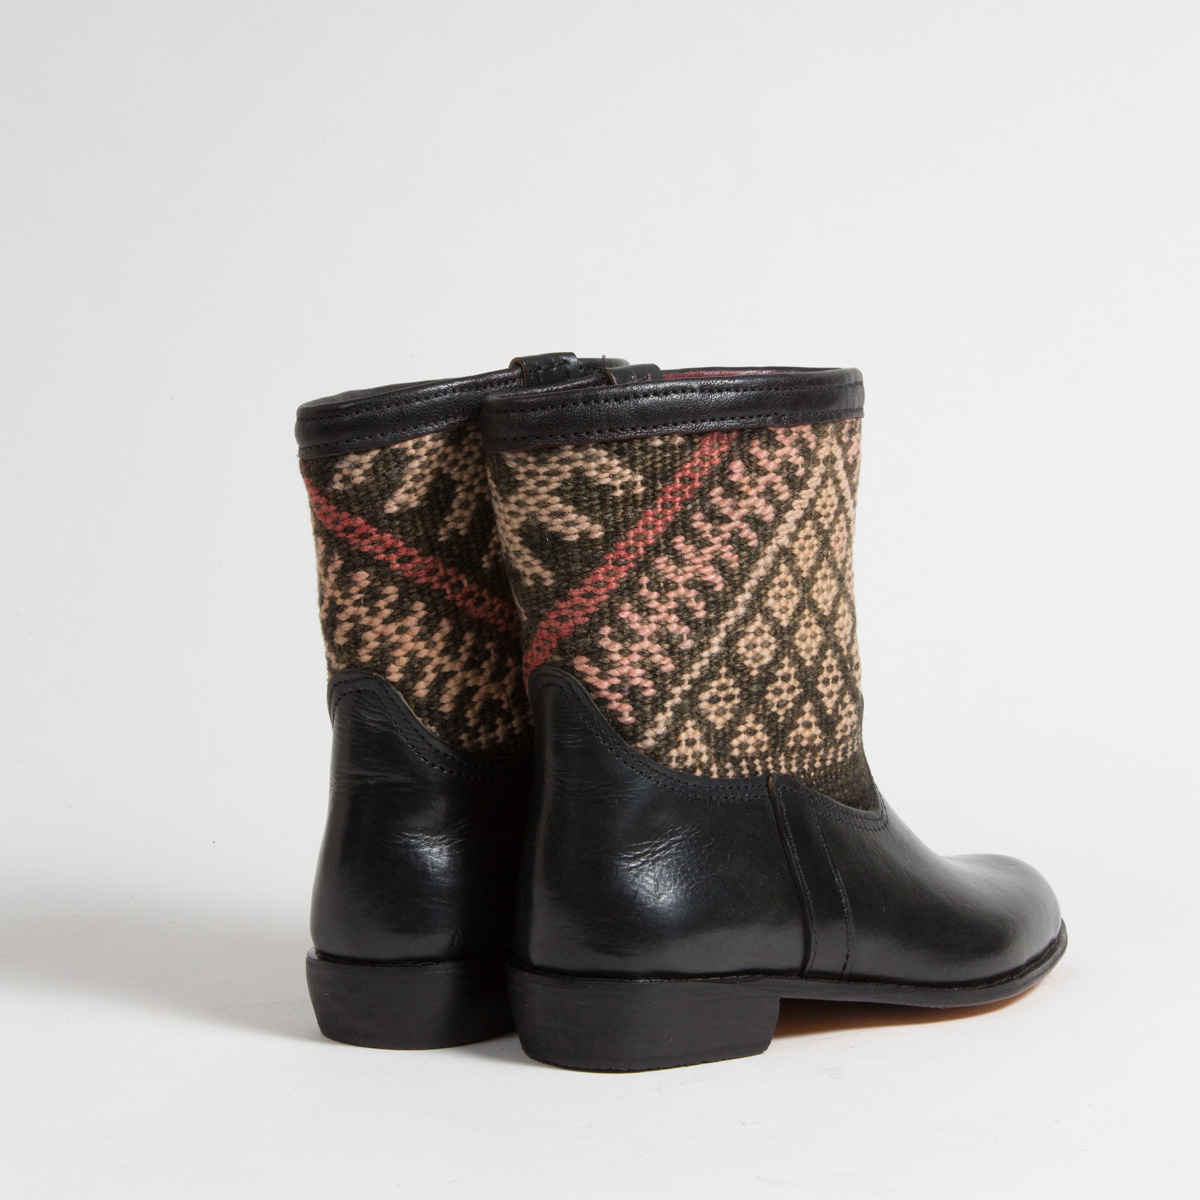 Bottines Kilim cuir mababouche artisanales (Réf. RPN28-41)